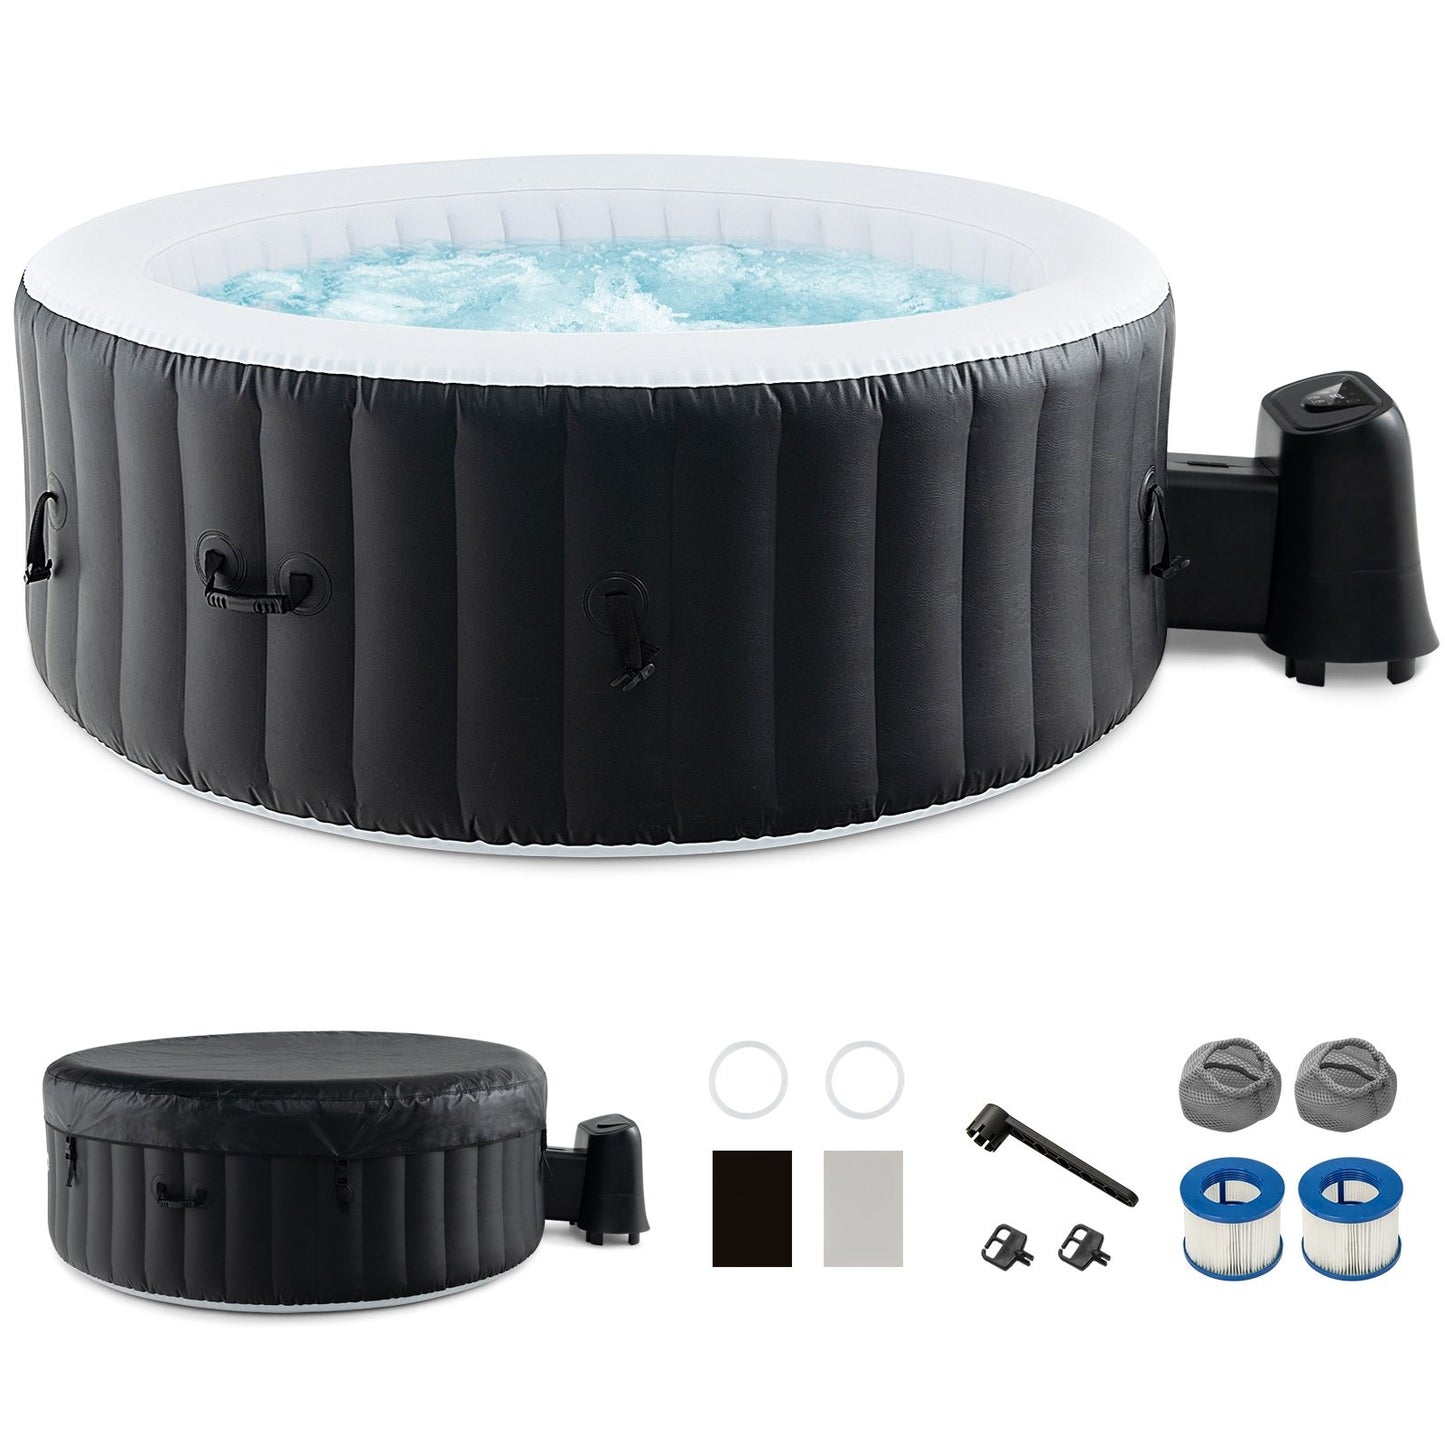 70/80 Inches Round SPA Pool Hottub with 110/130 Air Jets Electric Heater Pump-L, Black